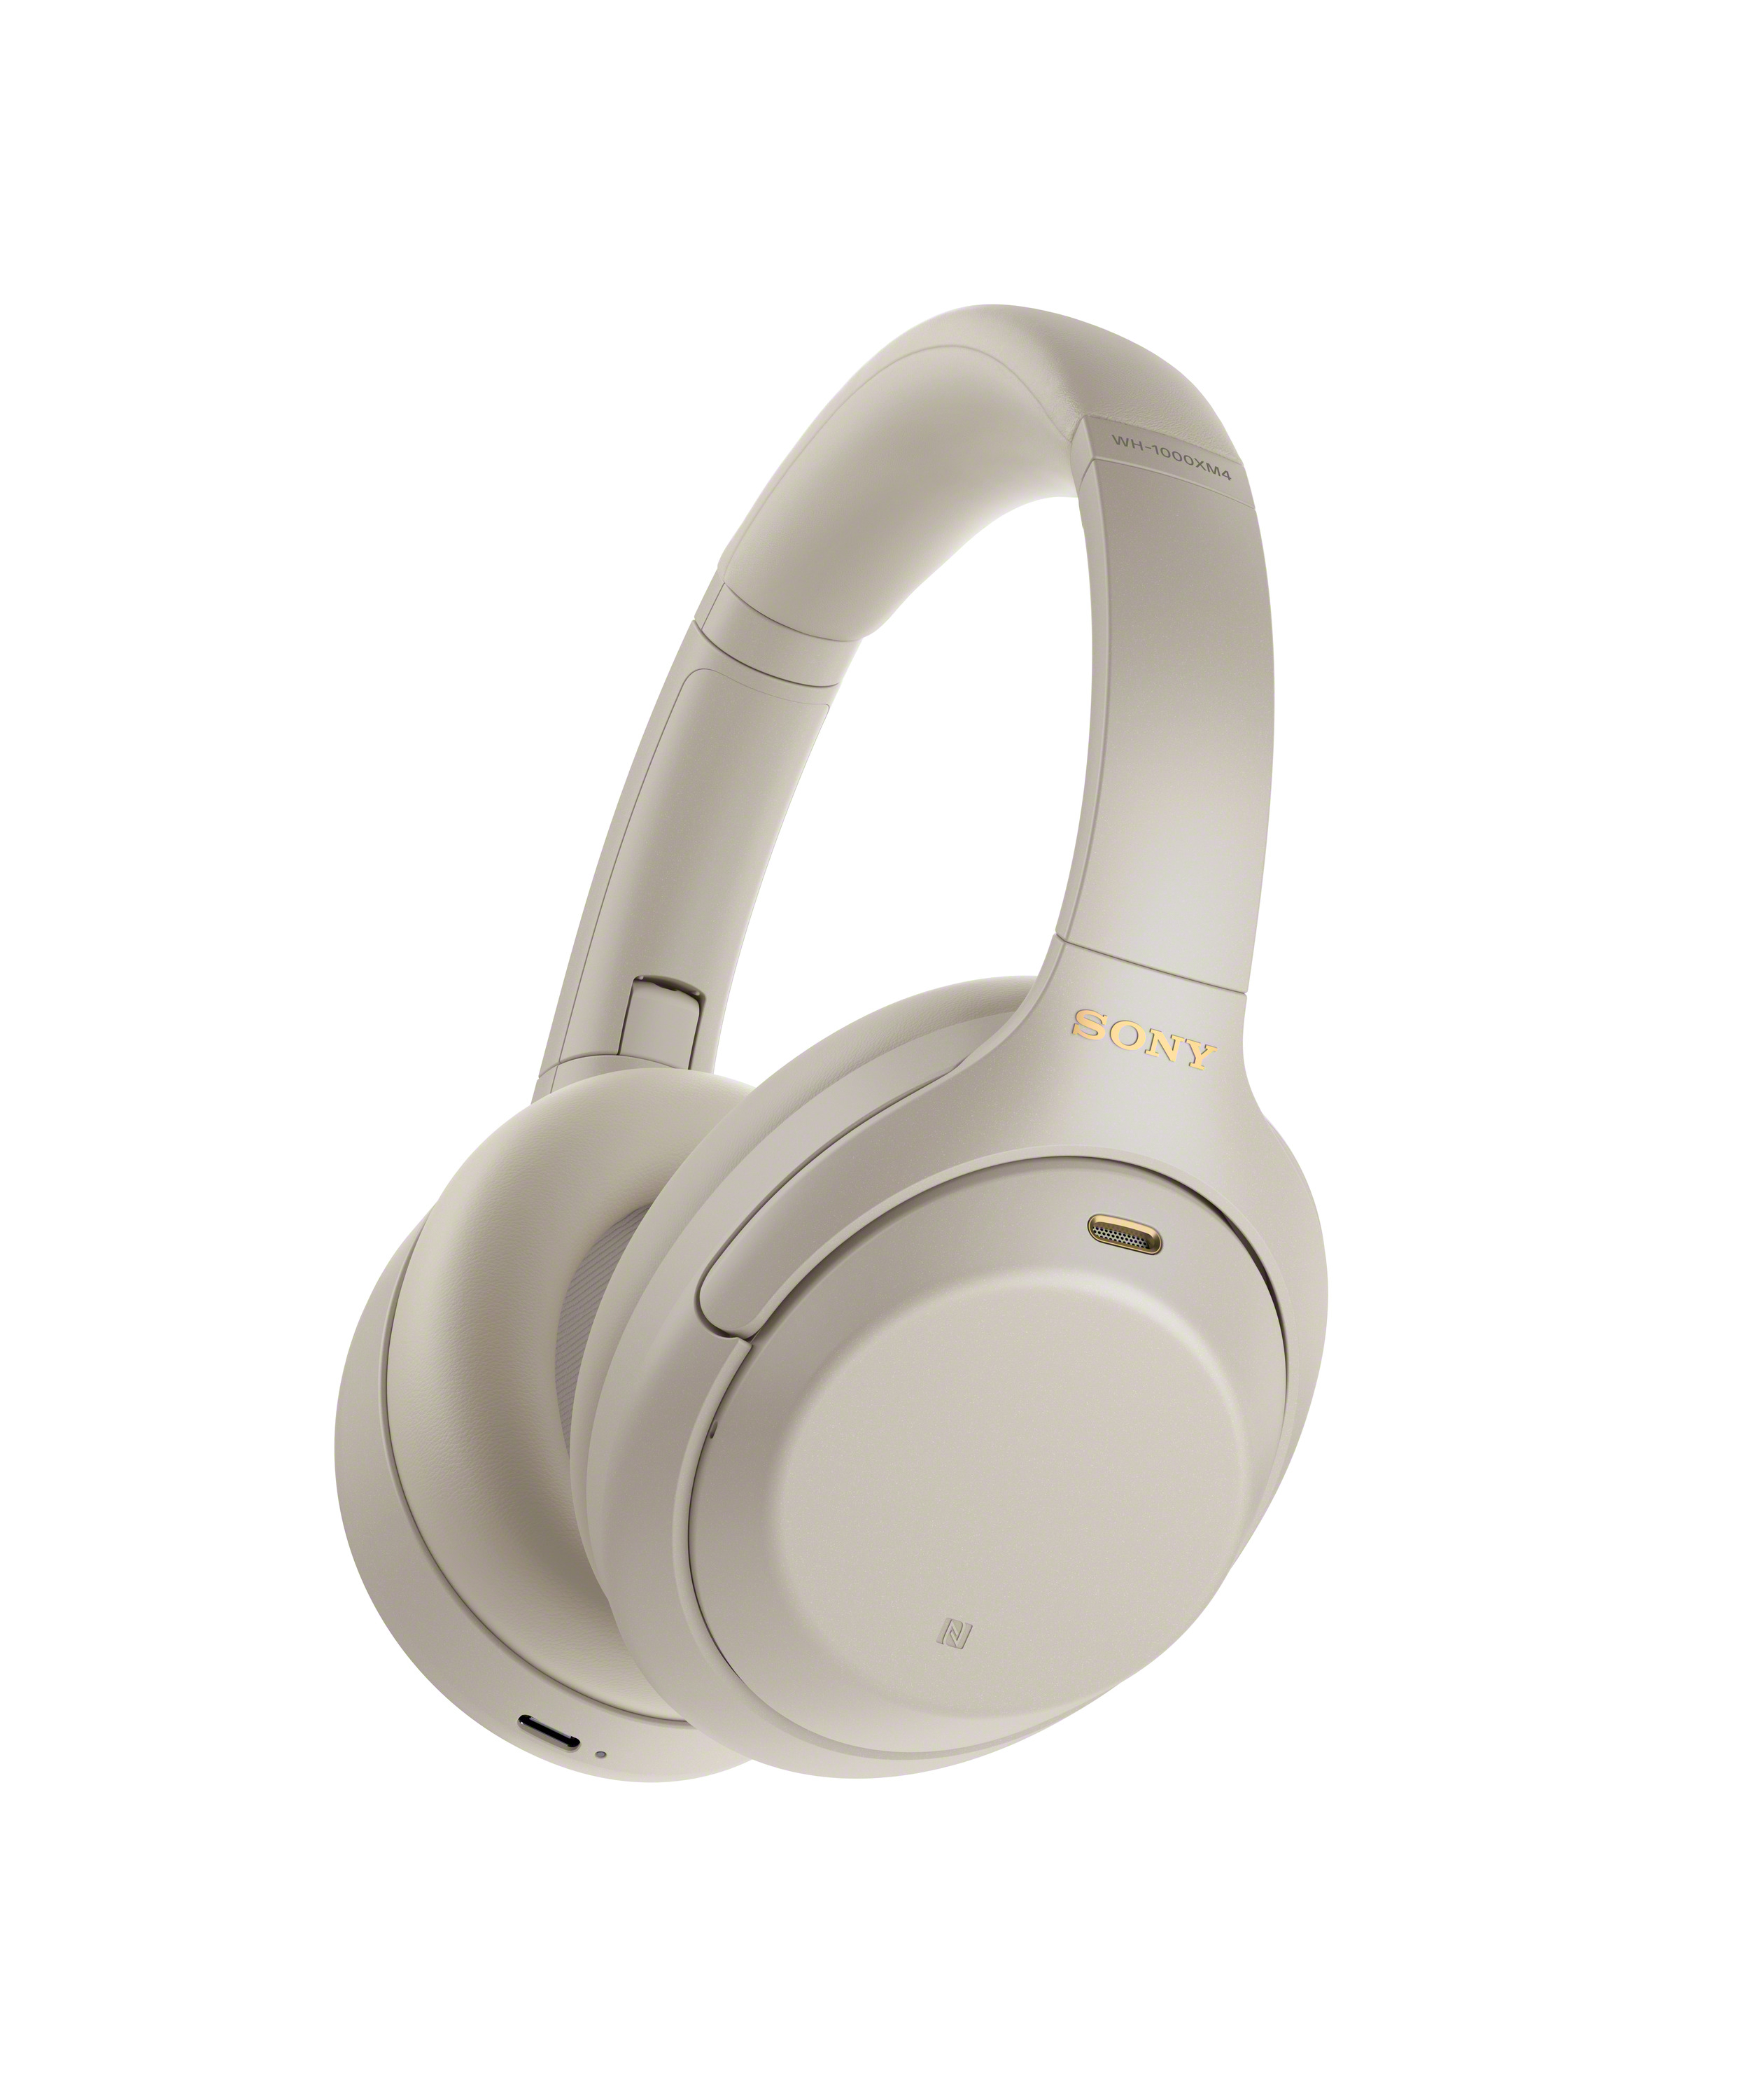 Sony WH-1000XM4 Wireless Noise Canceling Over-the-Ear Headphones with Google Assistant - Silver - image 1 of 11